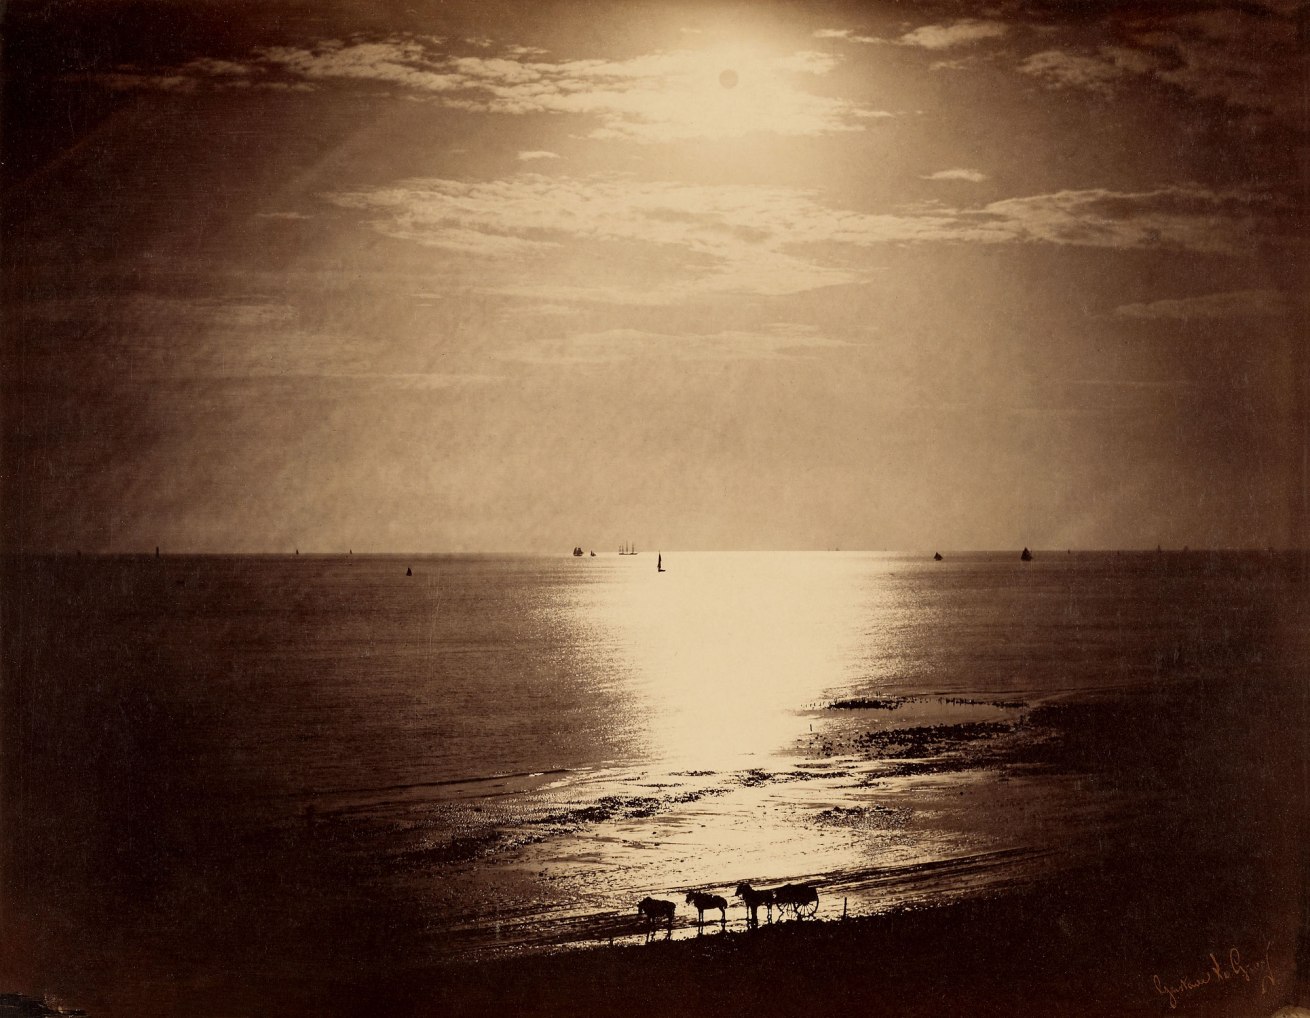 Fotó: Gustave Le Gray (French, 1820-1884)<br />The Sun at Its Zenith, Normandy<br />1856<br />Albumen silver print from a glass negative<br />Image: 32.5 x 41.6 cm (12 13/16 x 16 3/8 in.)<br />The J. Paul Getty Museum, Los Angeles